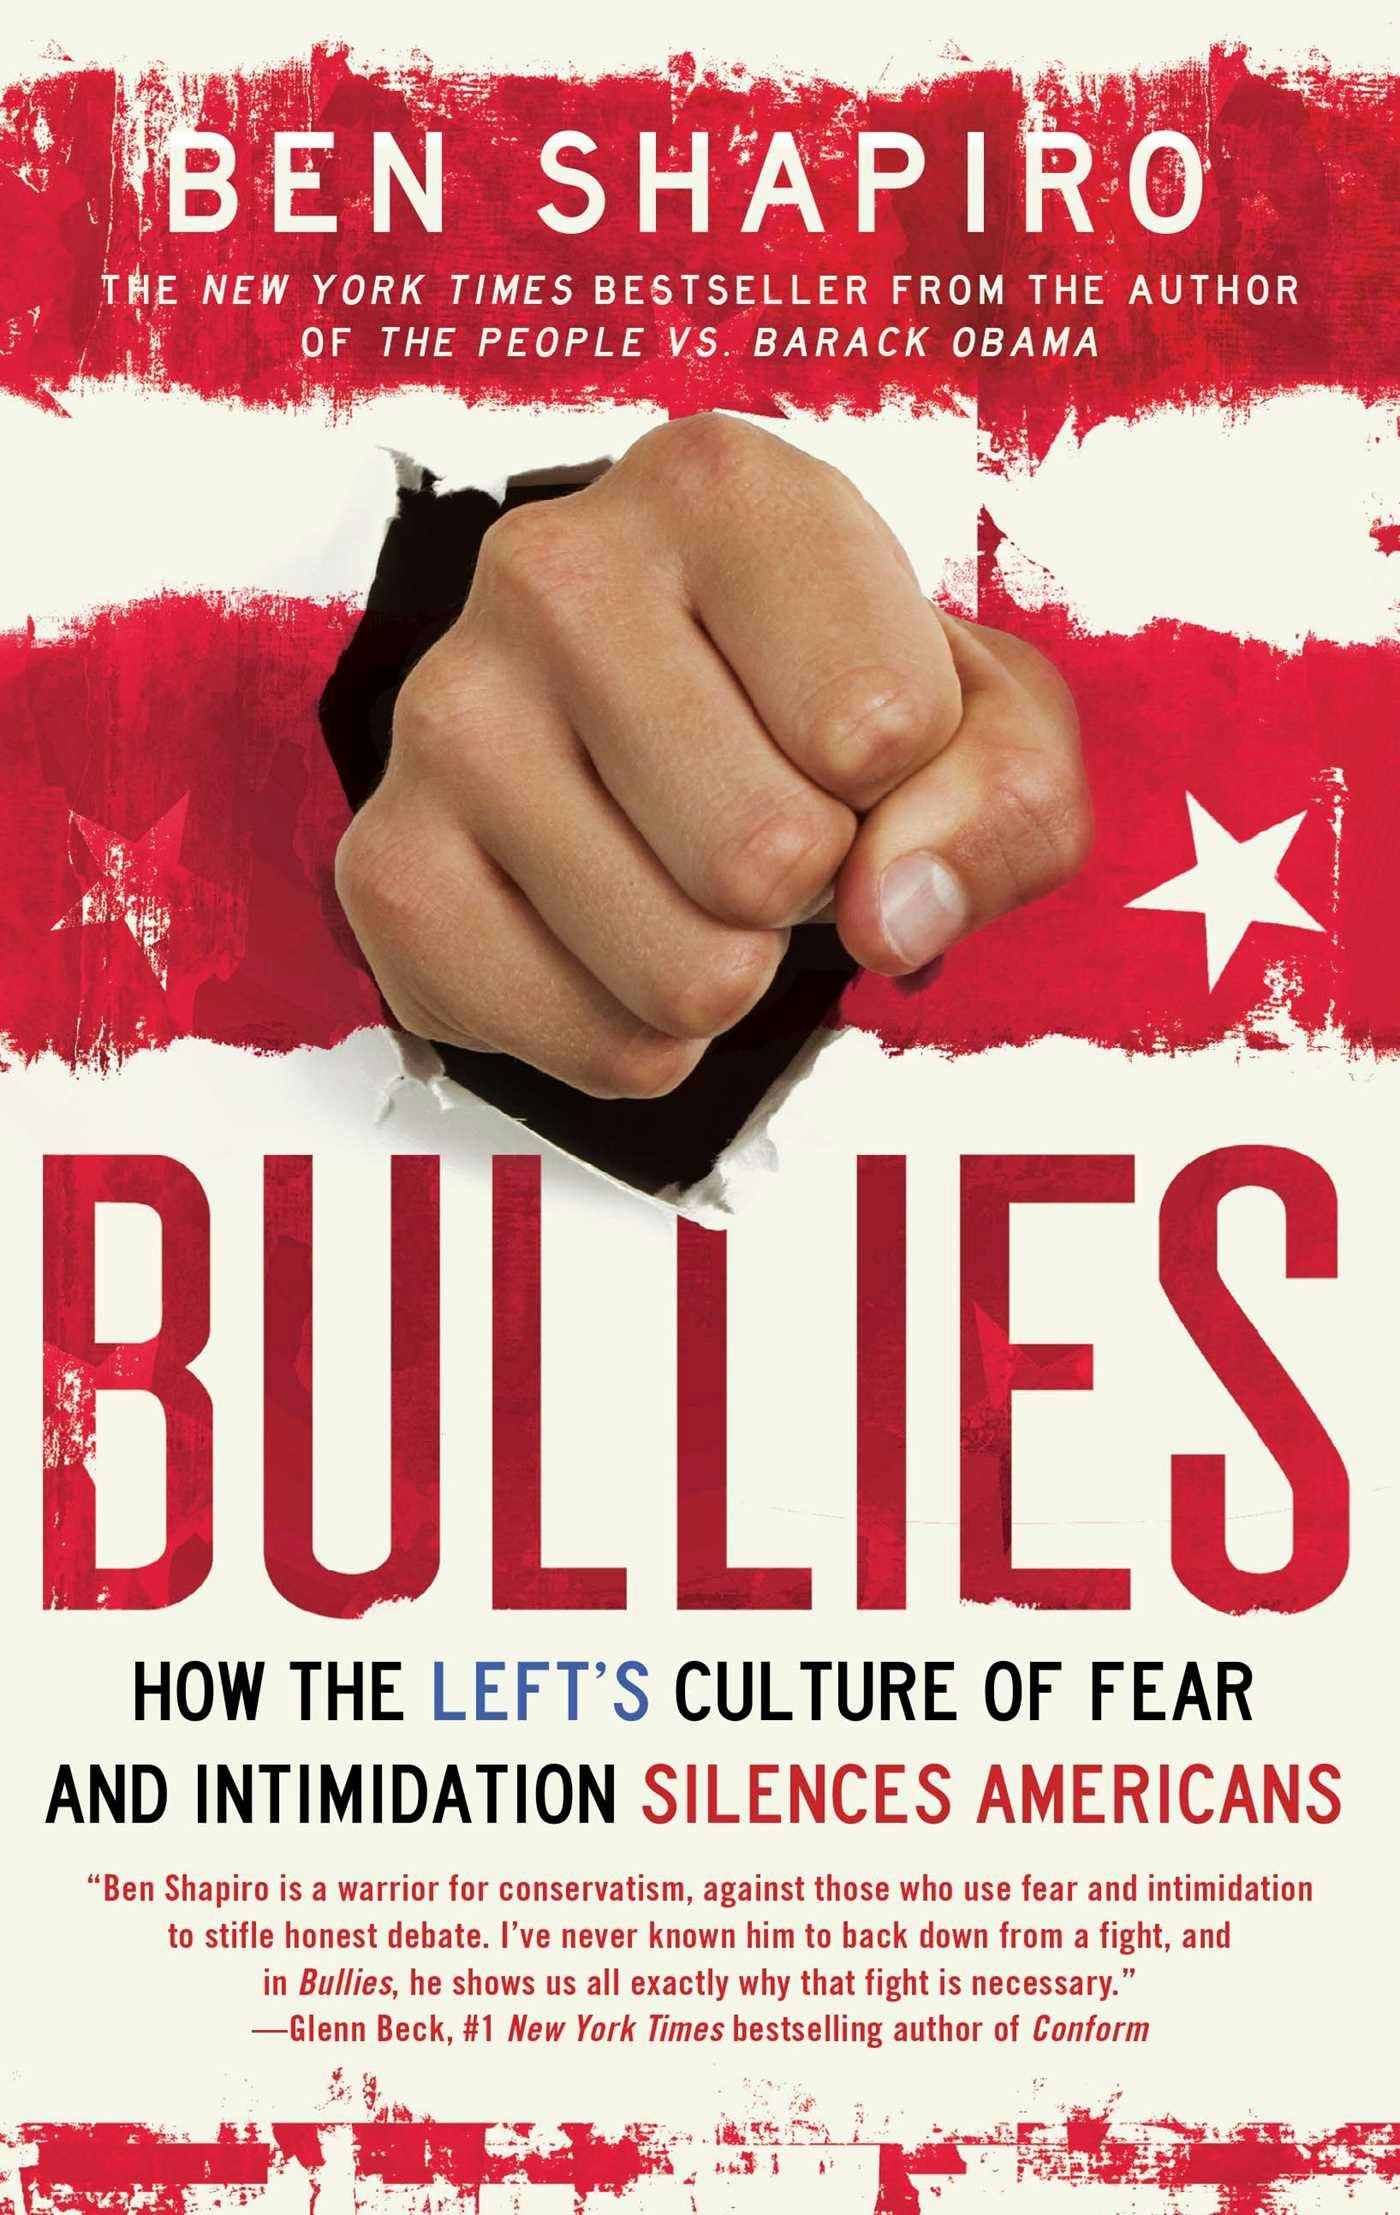 Bullies: How the Left's Culture of Fear and Intimidation Silences Americans - Ben Shapiro